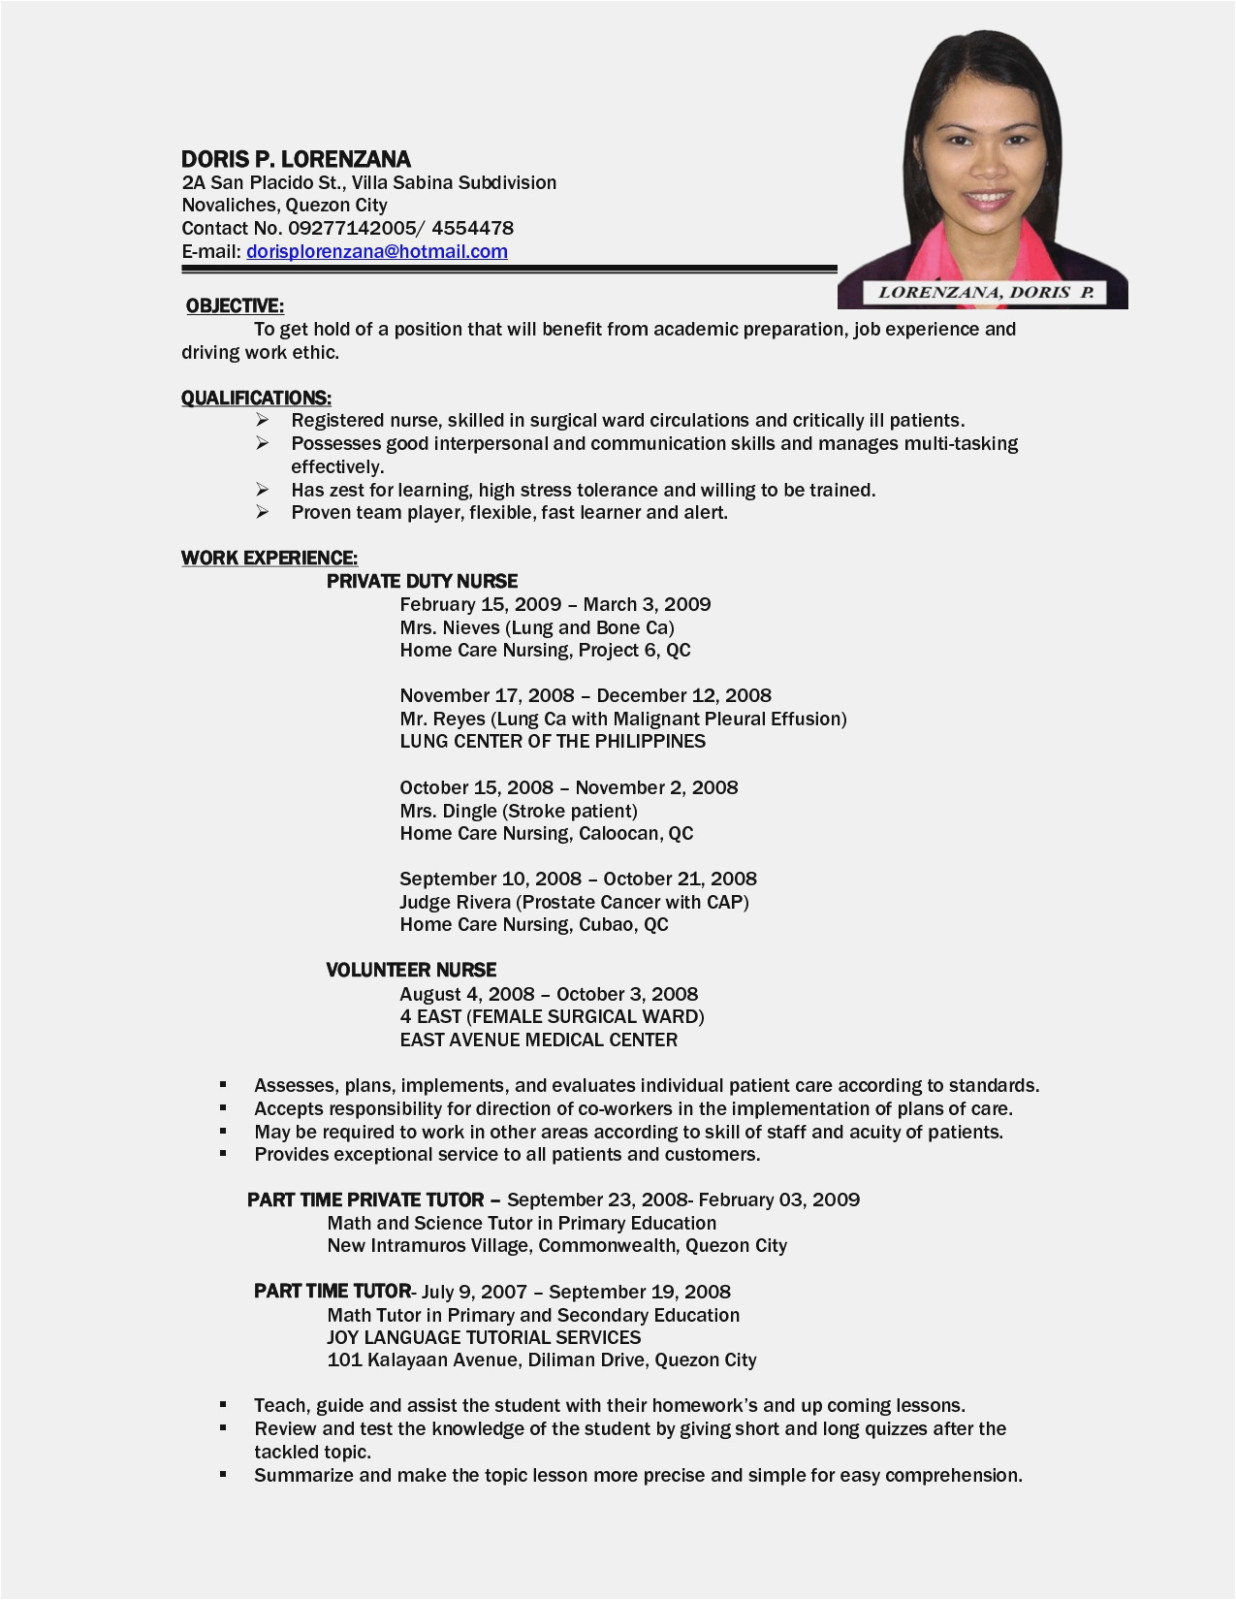 Sample Of Simple Resume In Philippines This Story Behind Ideal